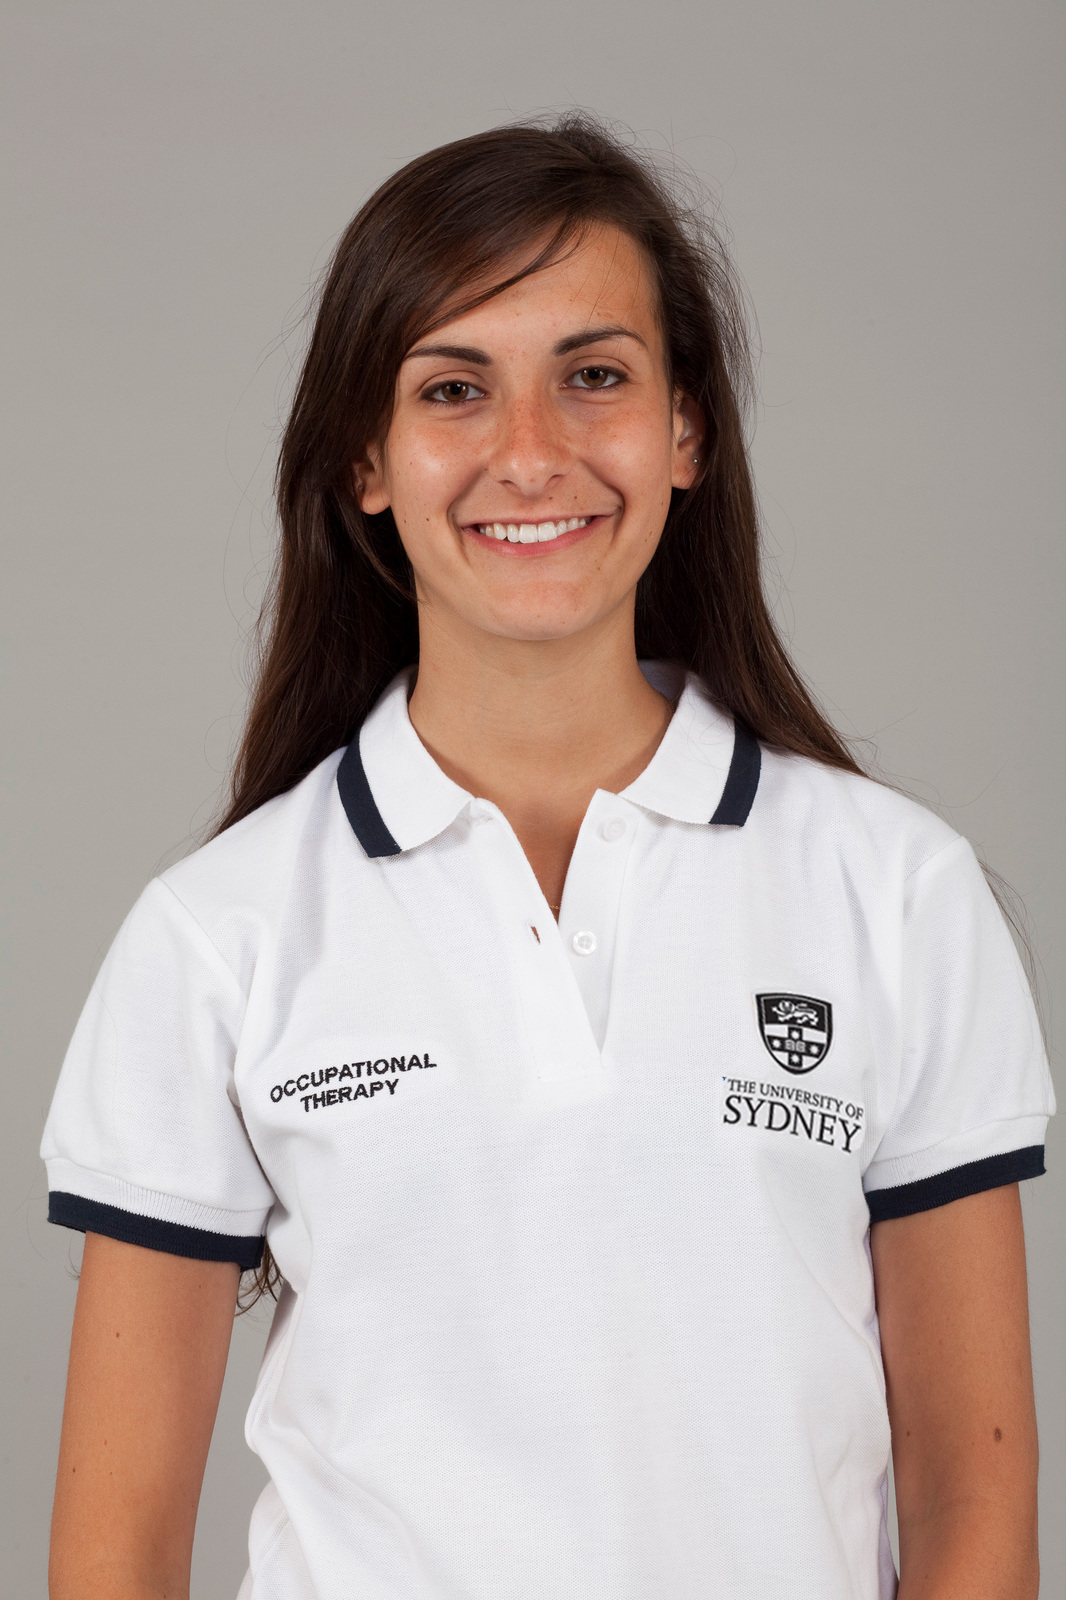 The University of Sydney eStore - Polo shirt - Women's Occupational Therapy